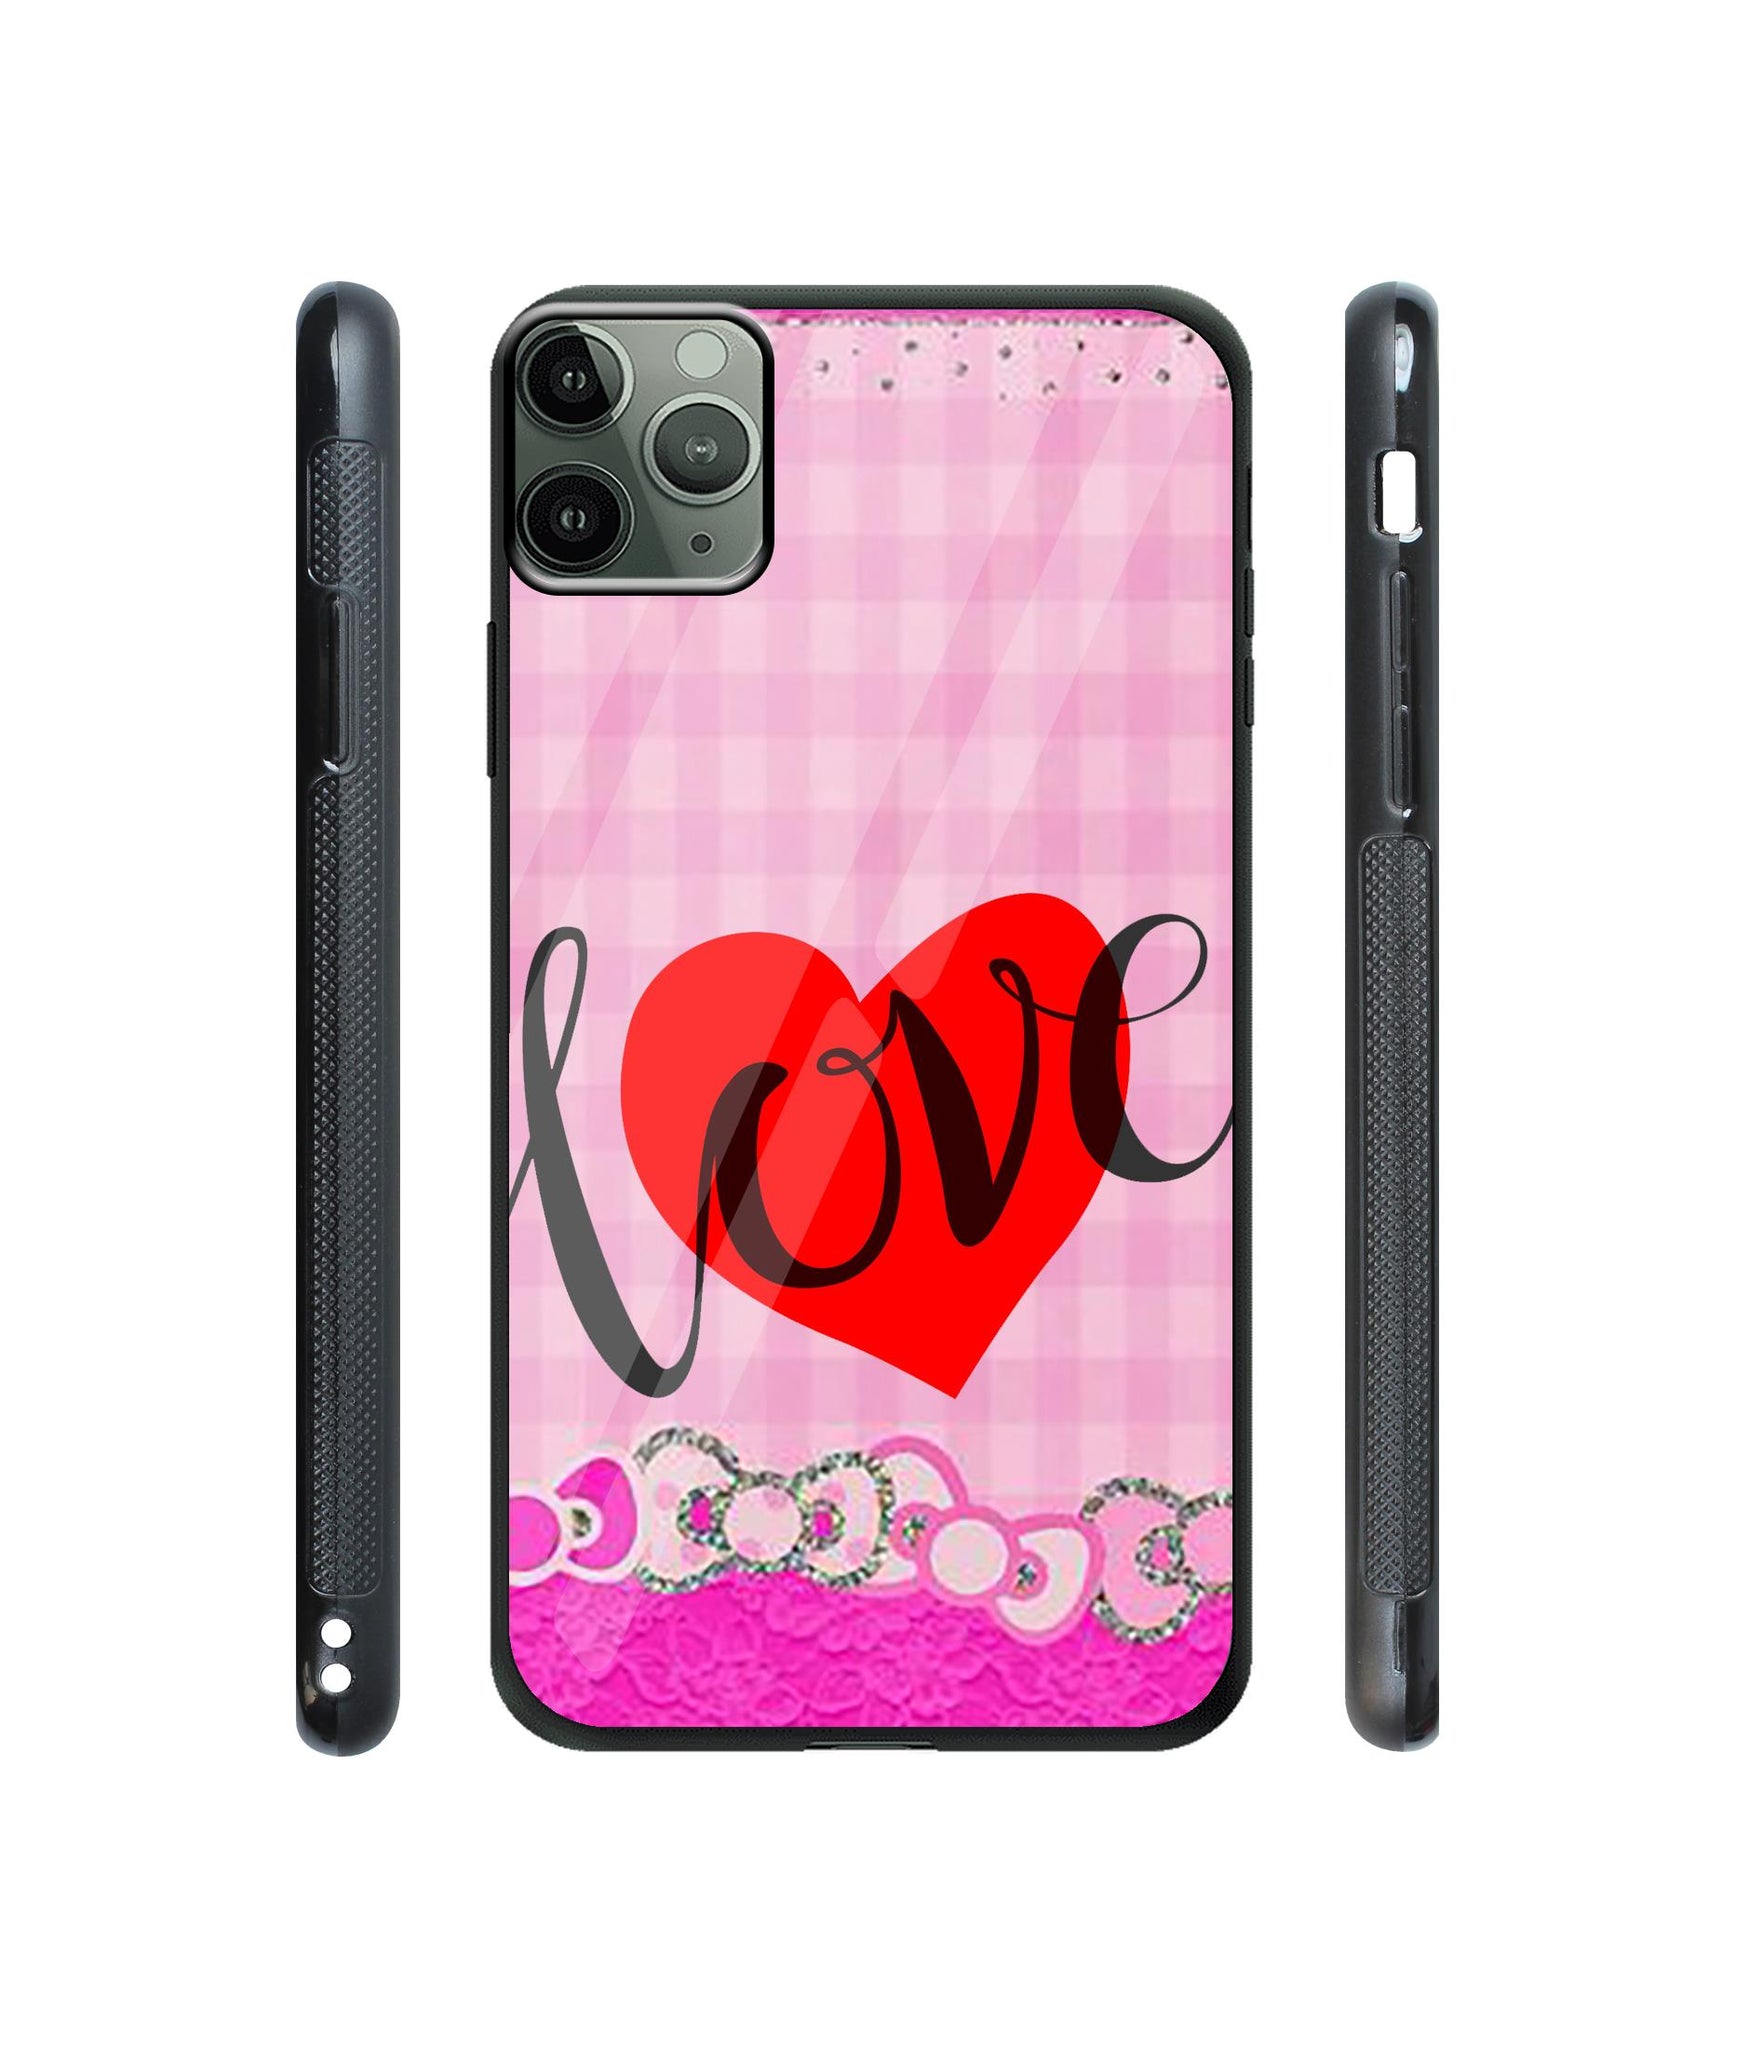 Love Print On Cloth Designer Printed Glass Cover for Apple iPhone 11 Pro